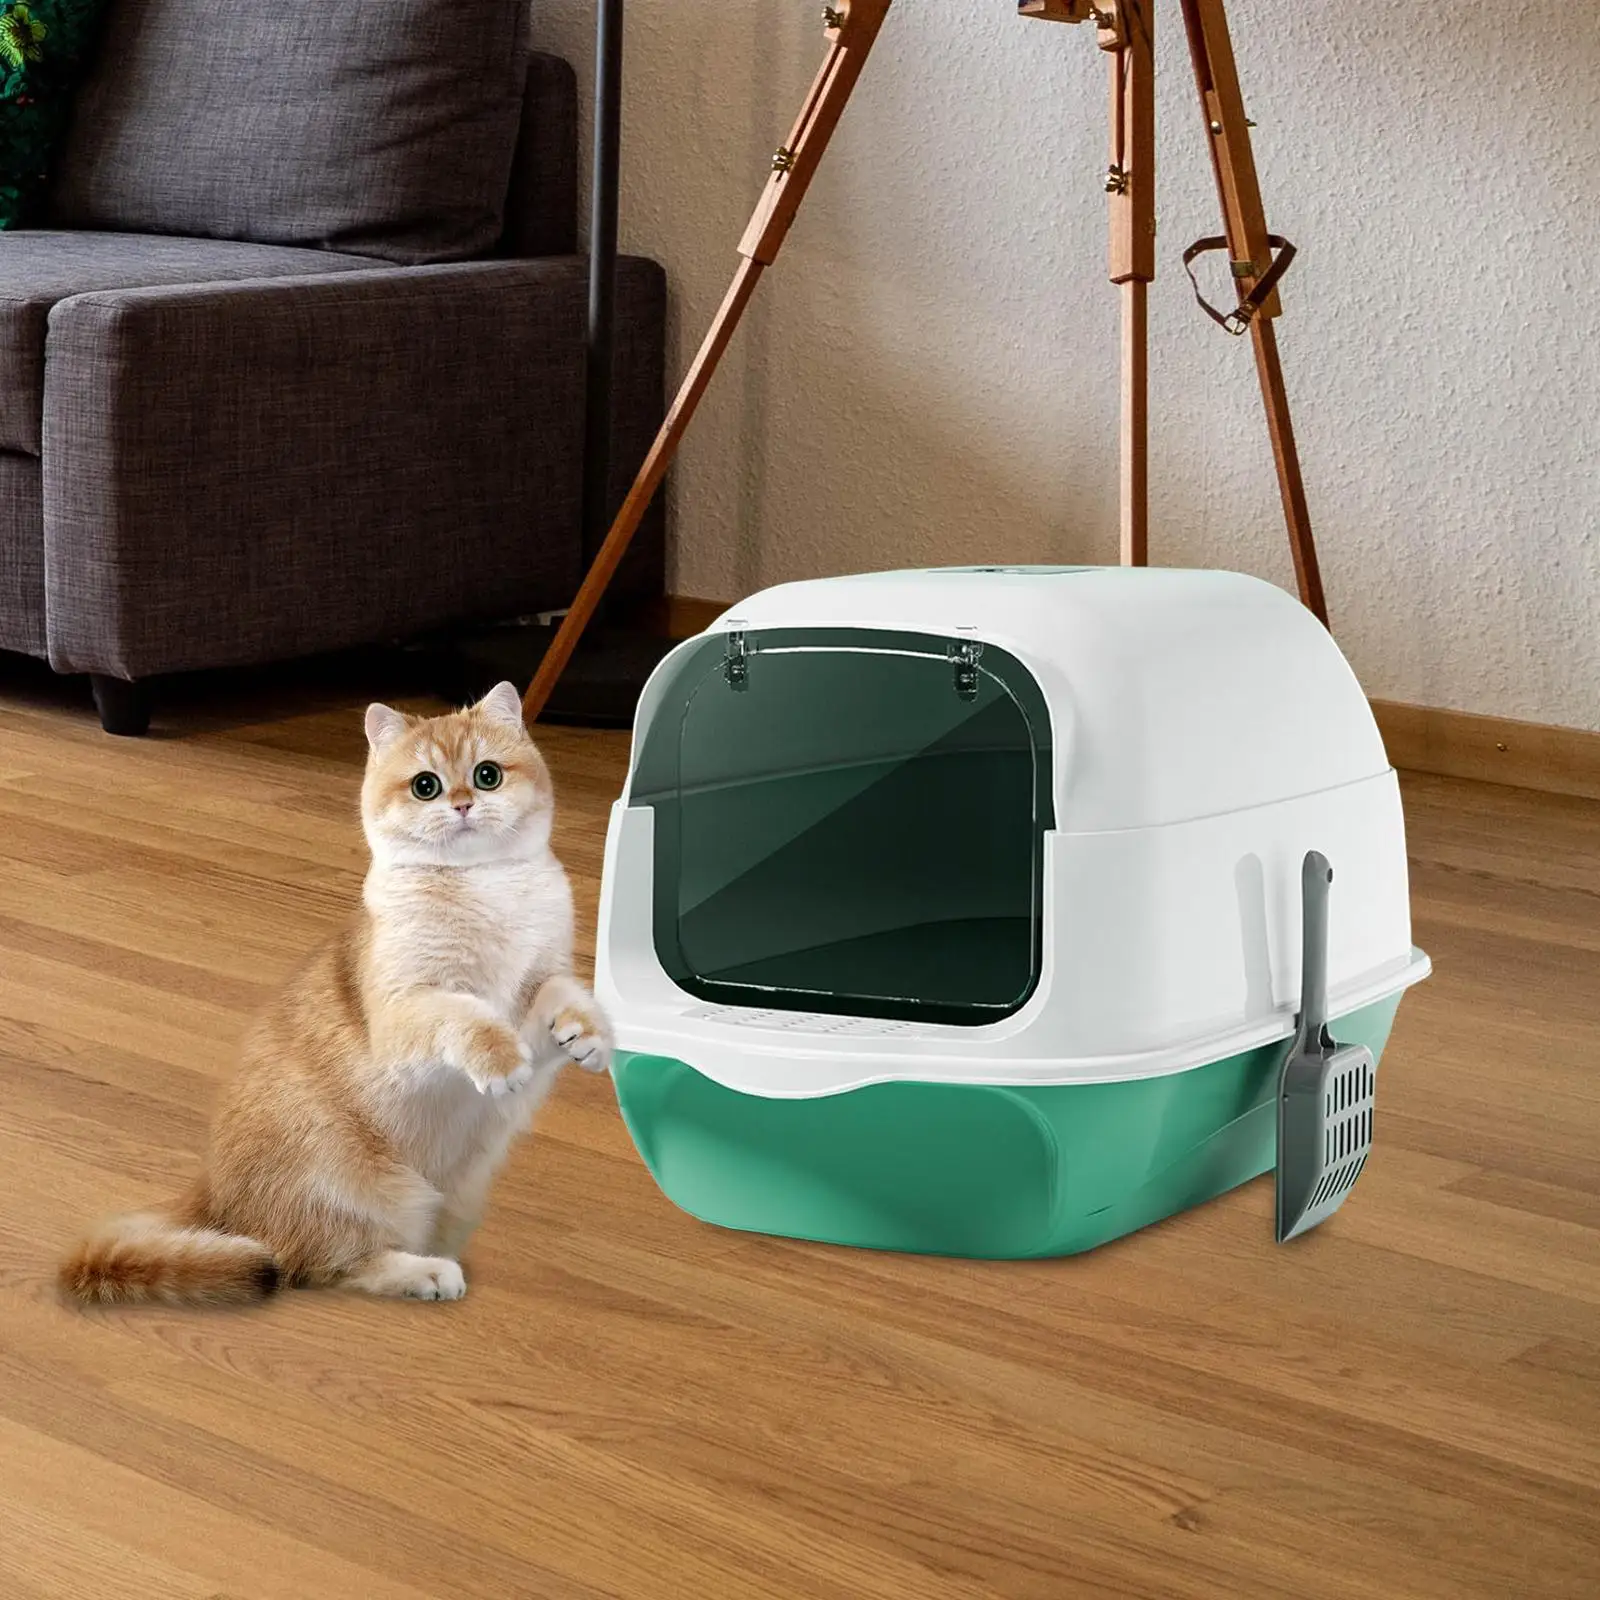 Hooded Cat Litter Box with Lid Enclosed Cat Toilet Large Cat Litter Box for Indoor Cats Reusable Kitty Litter Tray Kitten Potty